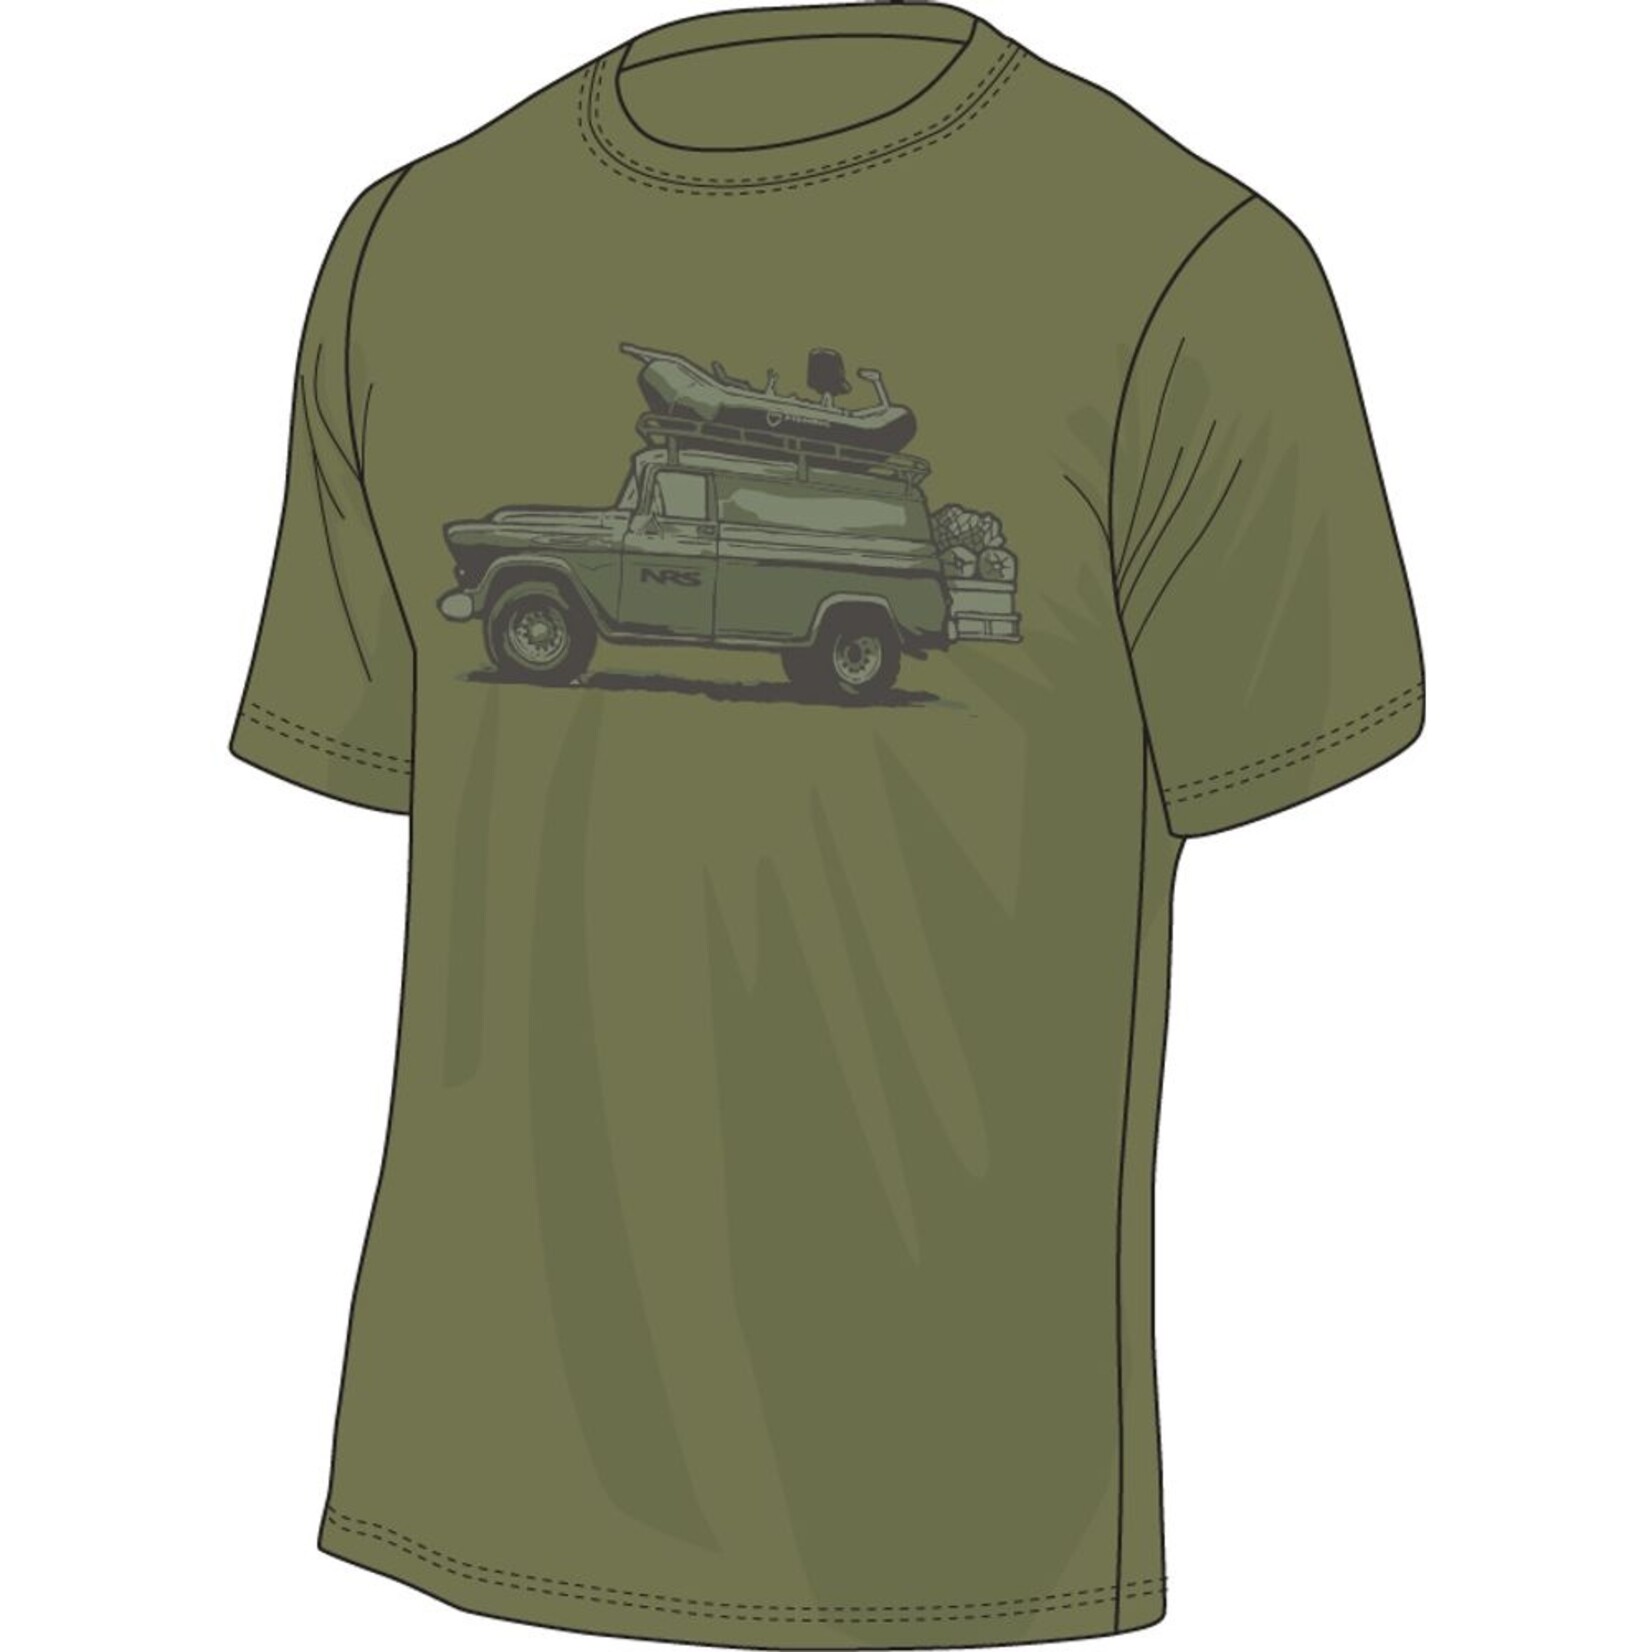 NRS, Inc NRS Men's Rigged Out T-Shirt